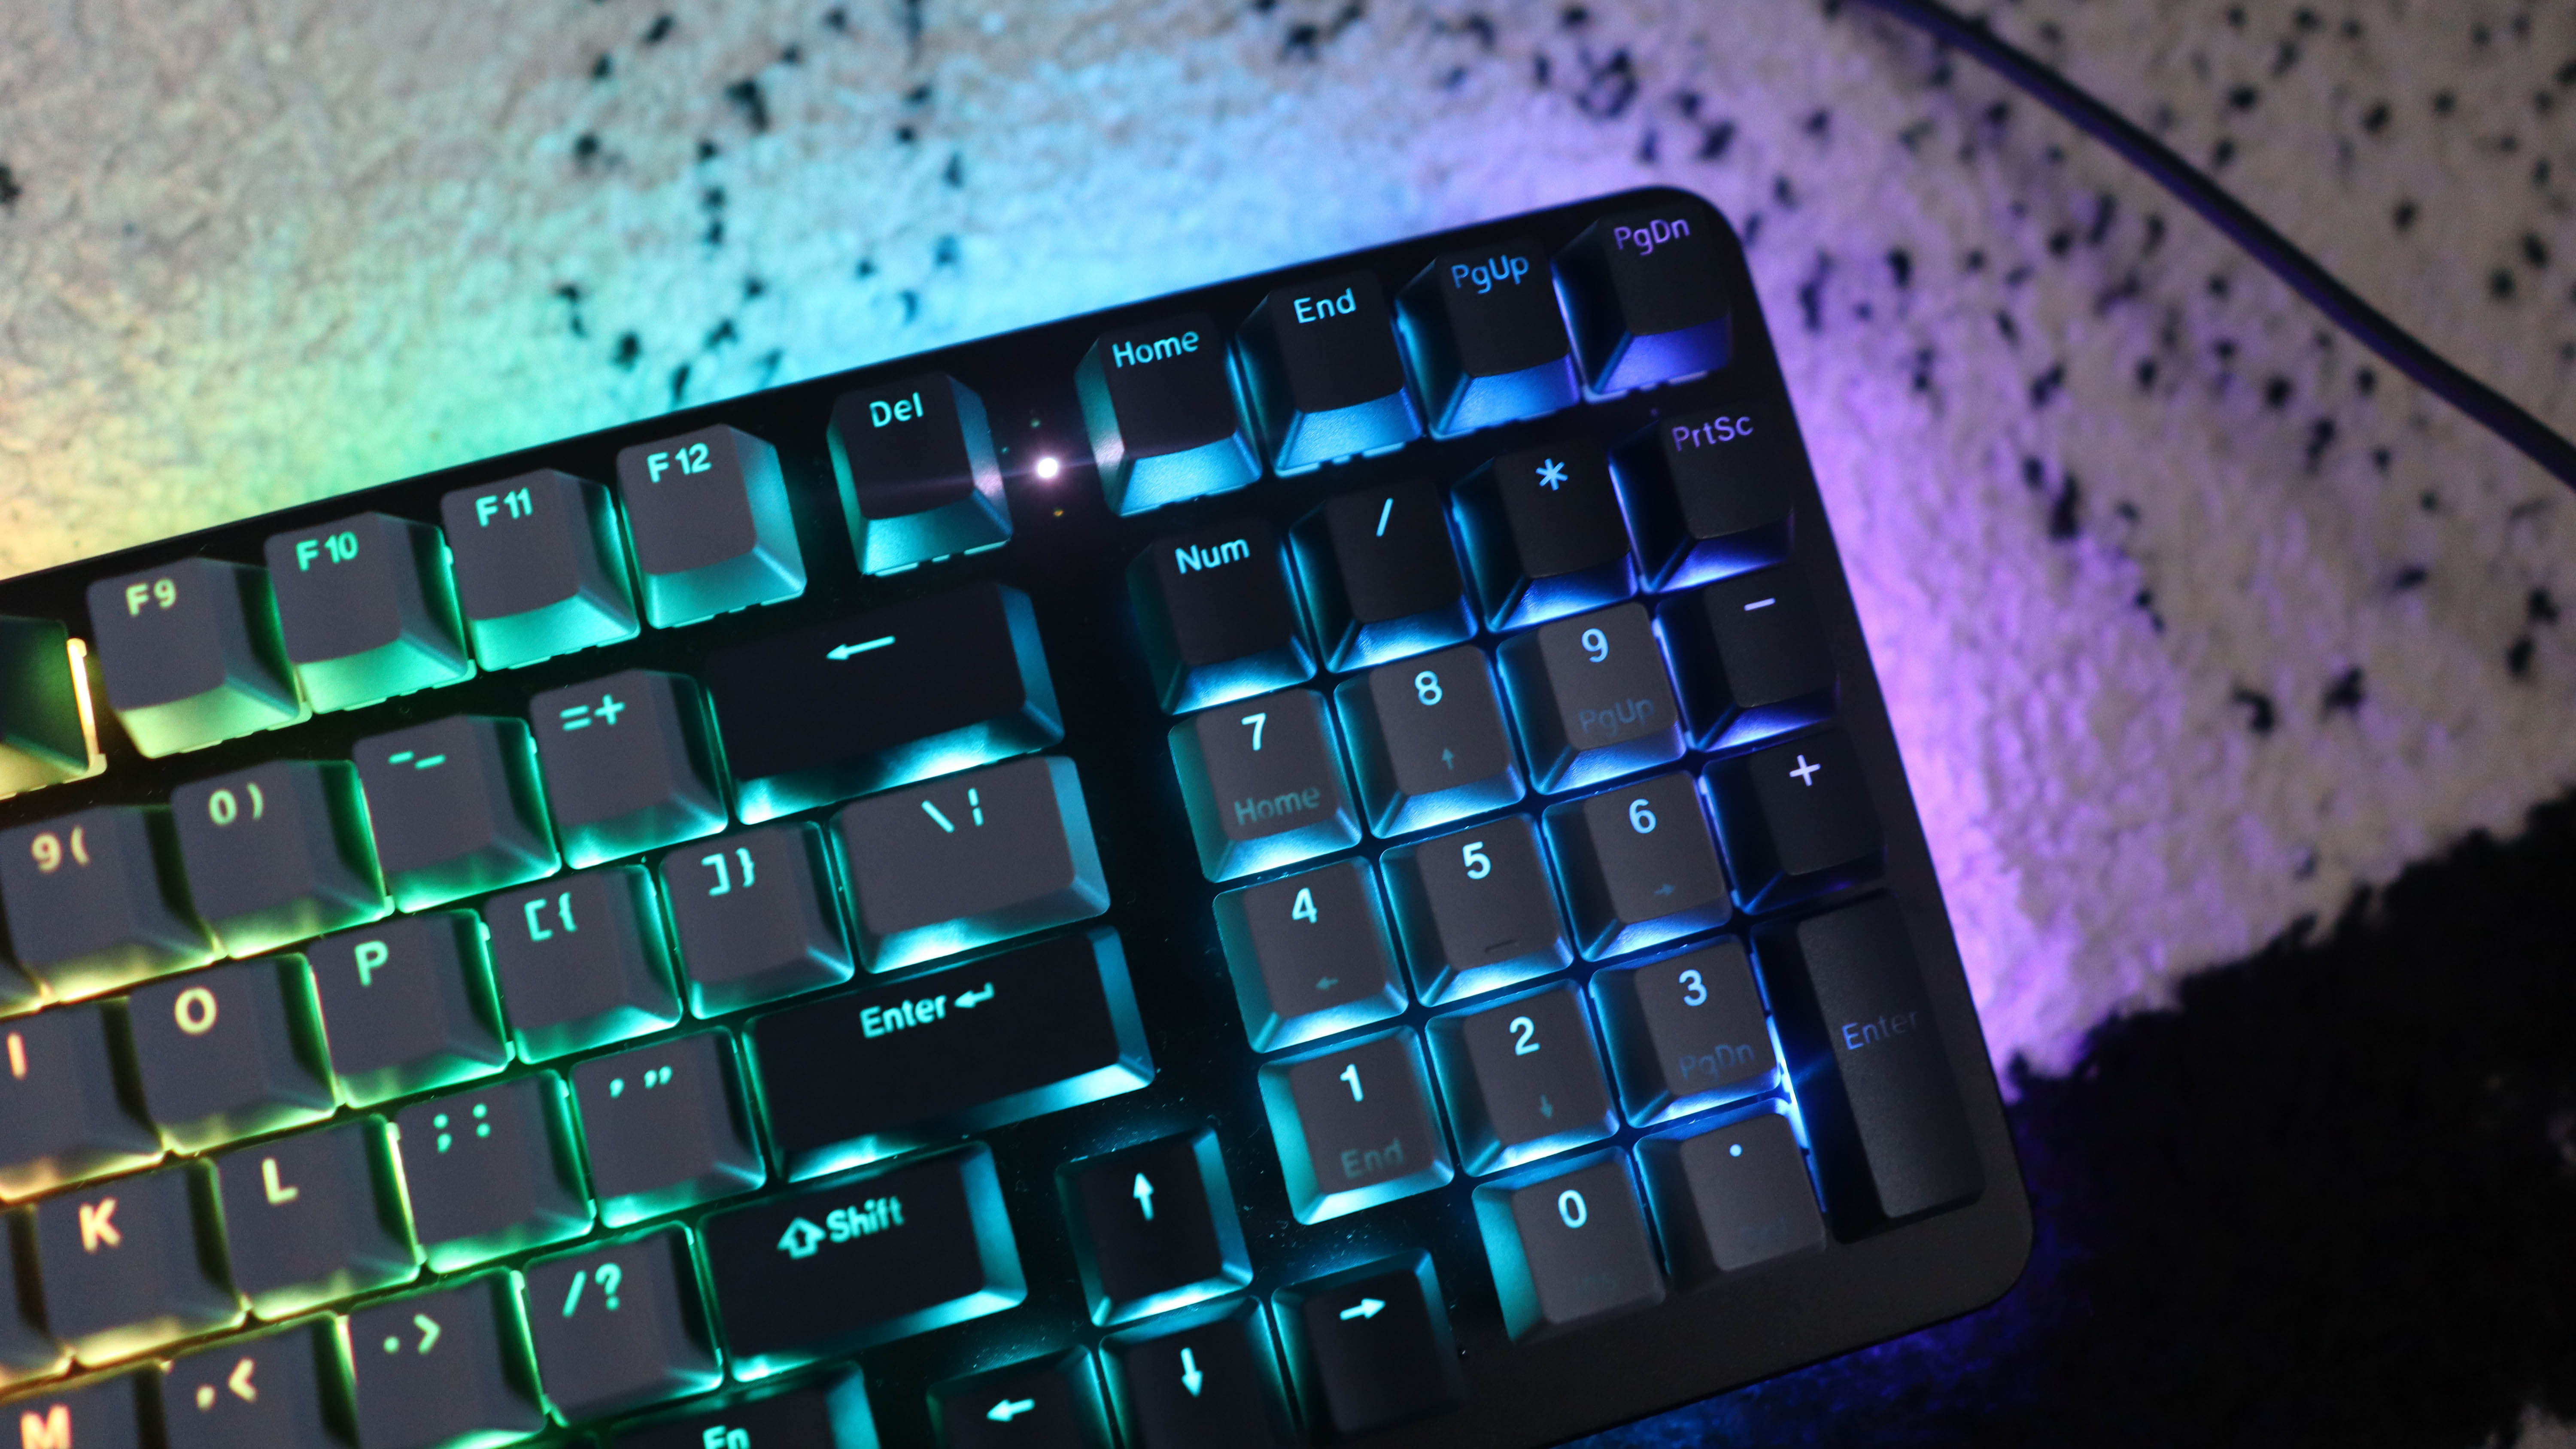 Drop Shift V2 mechanical keyboard with RGB lighting enabled.